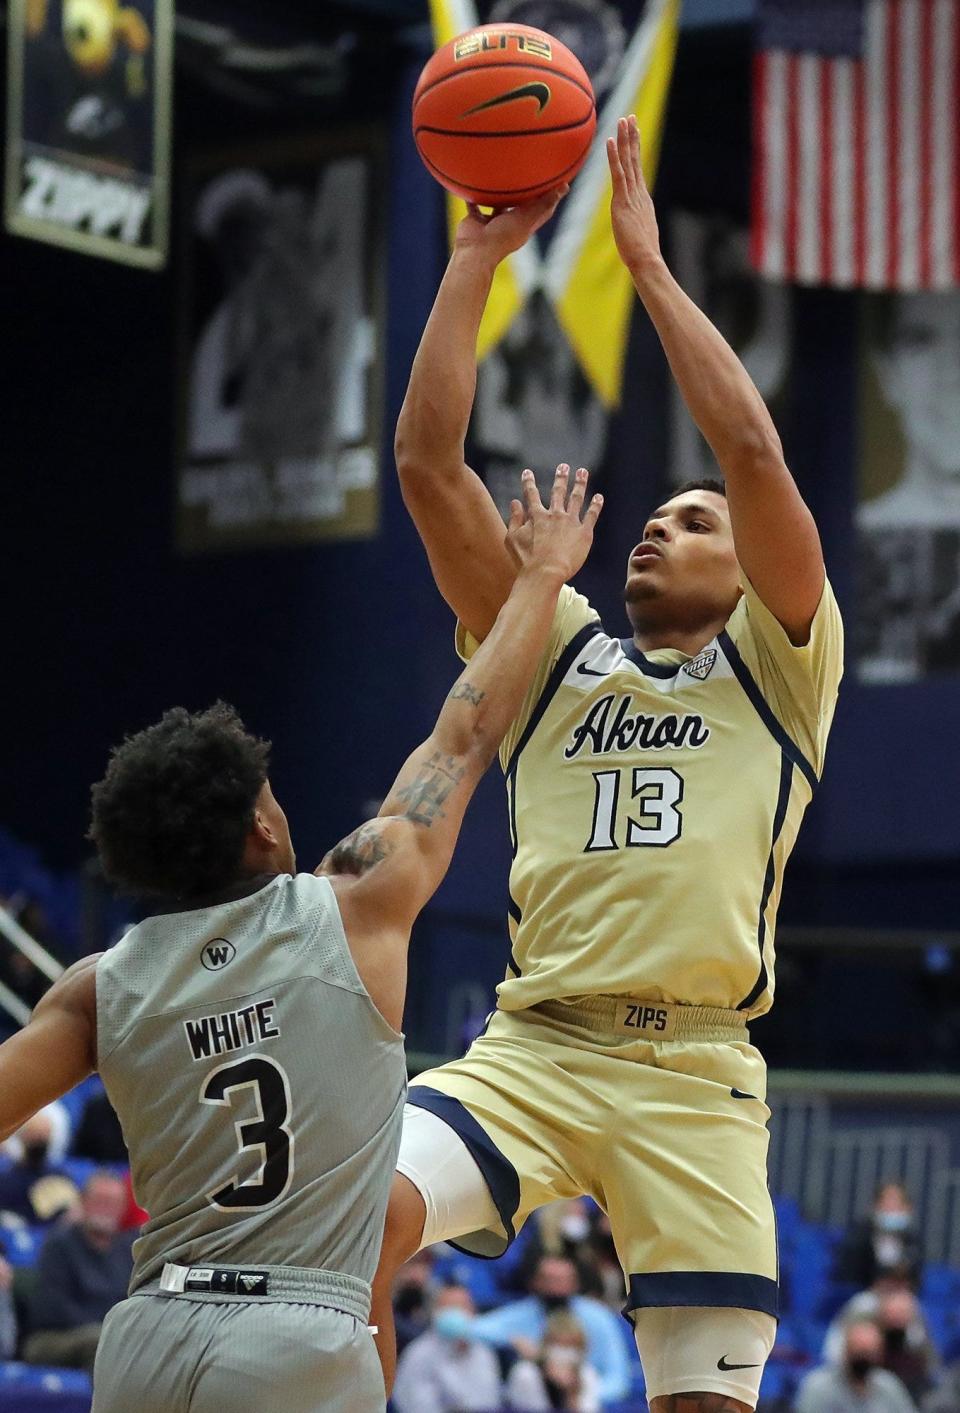 Akron Zips guard Xavier Castaneda (13) attempts a shot over Western Michigan Broncos guard B. Artis White (3) during the first half of an NCAA basketball game, Tuesday, Jan. 18, 2022, in Akron, Ohio. [Jeff Lange/Beacon Journal]